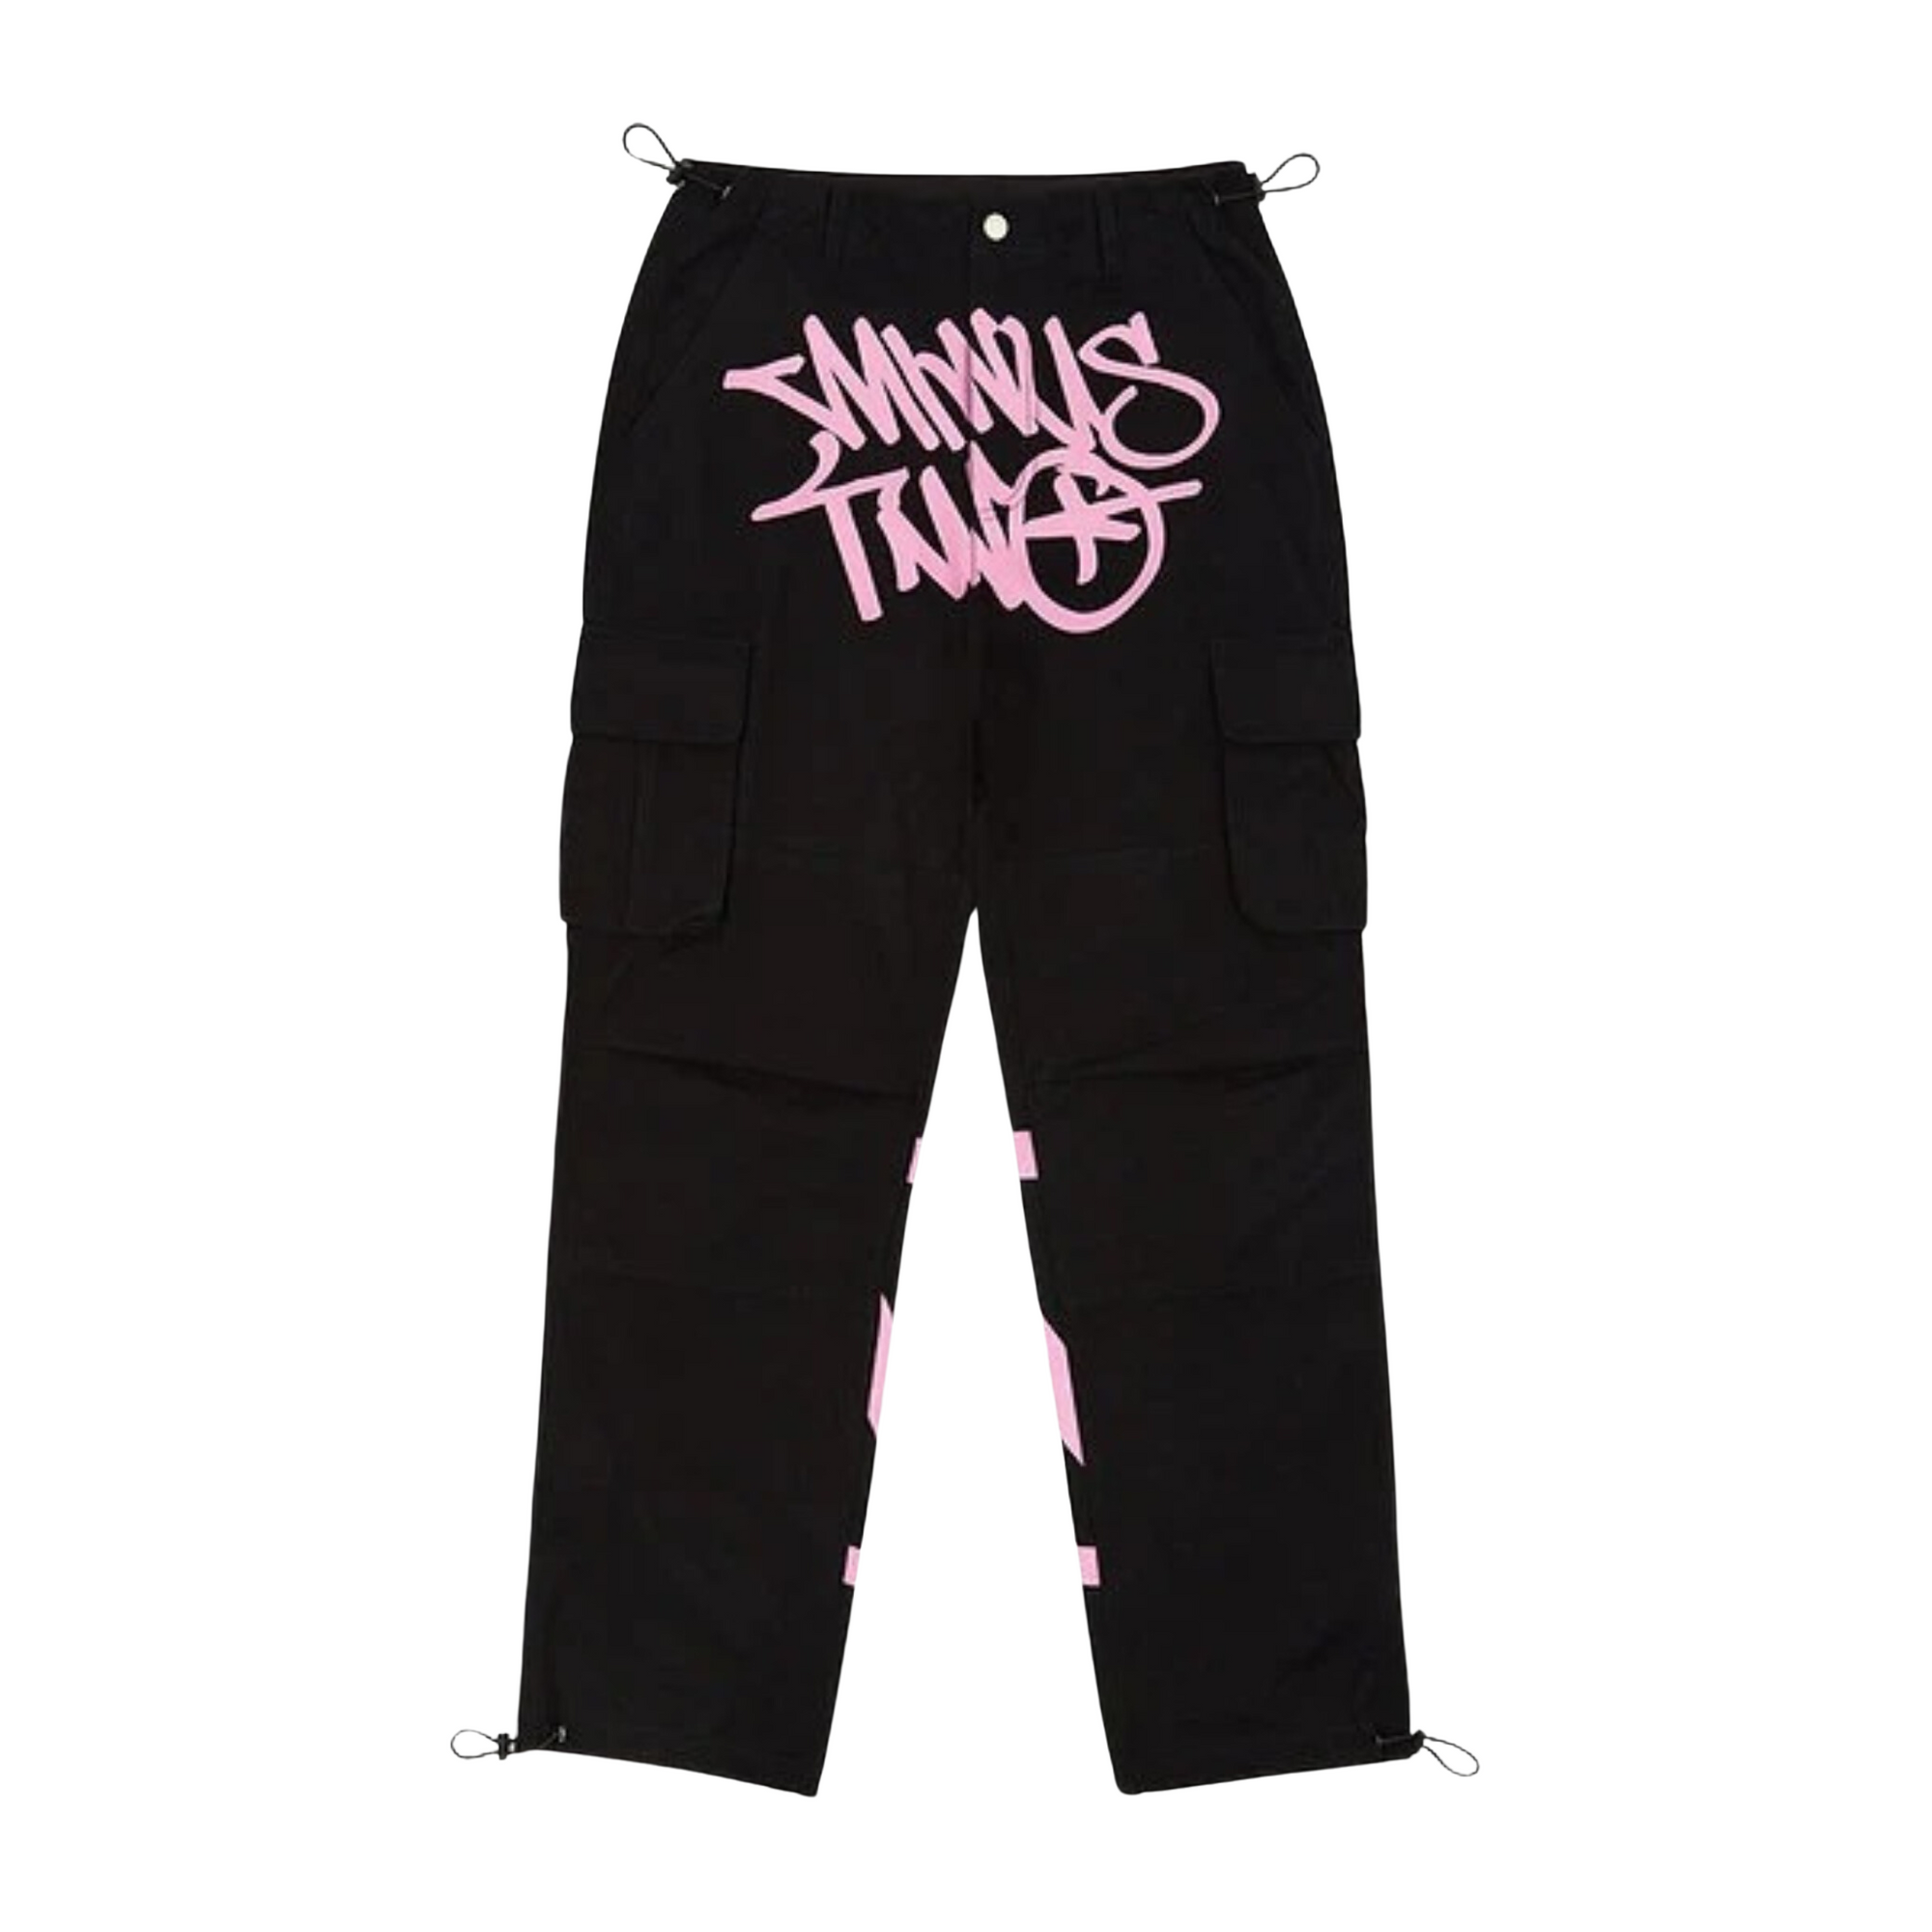 Cargo M2 Black and Pink